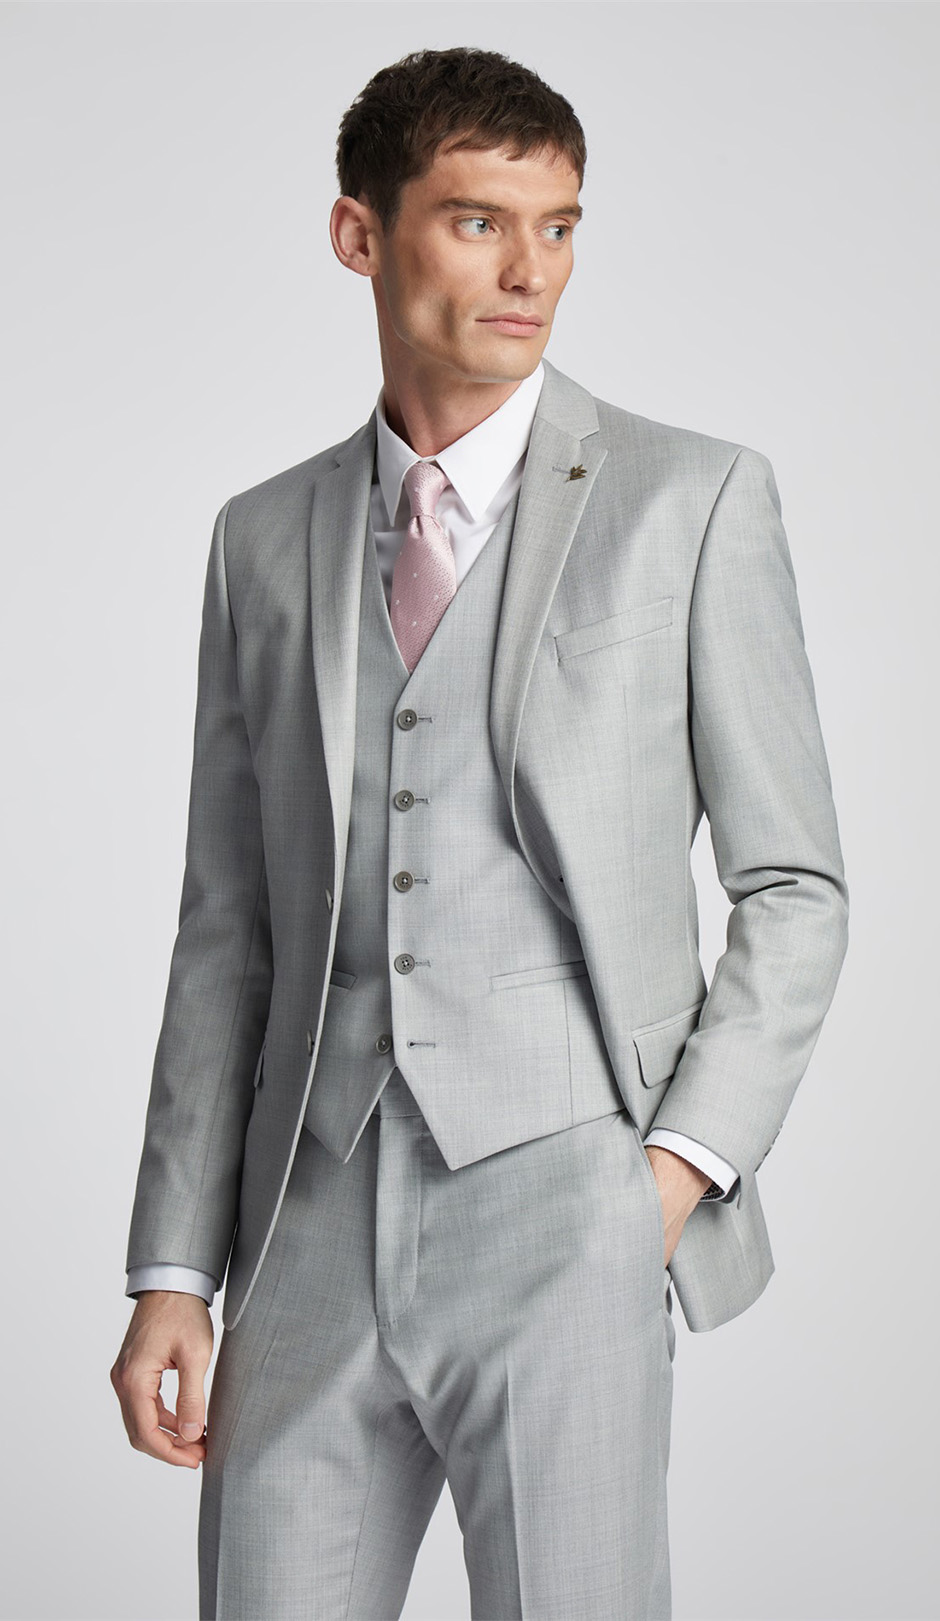 Grey groom suit from Ted Baker, available at Suit Supply